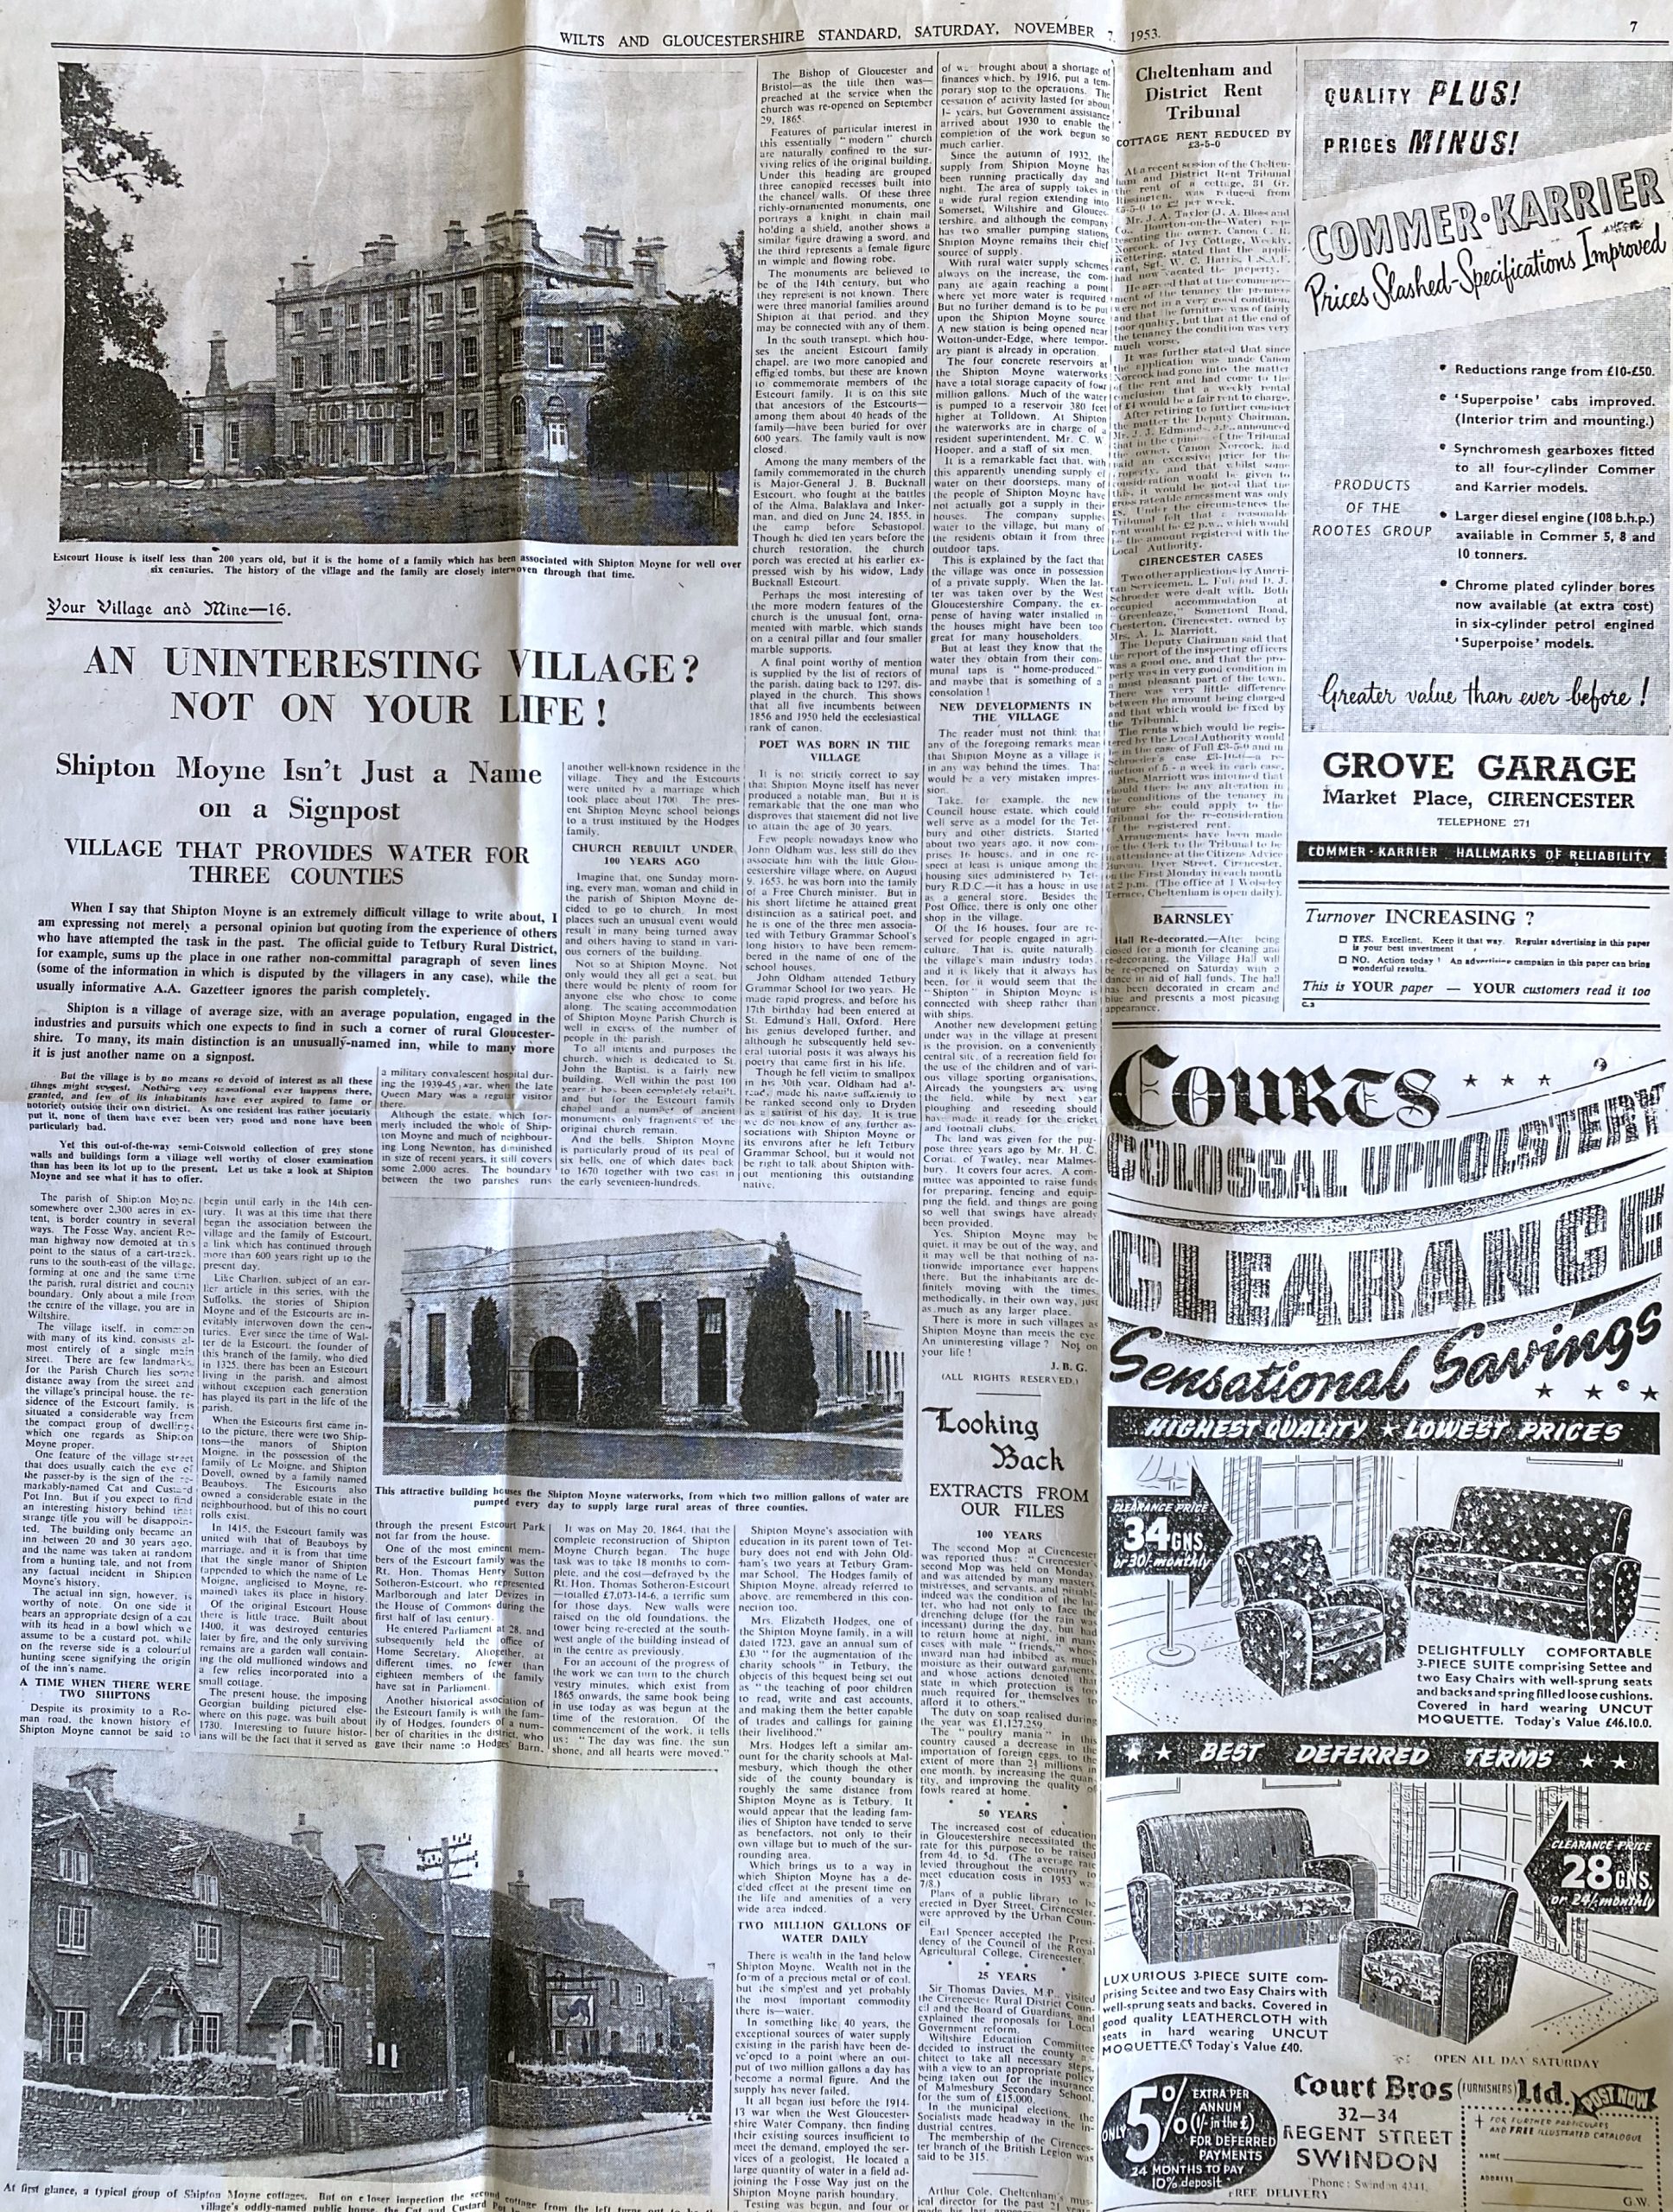 Wilts And Gloucestershire Standard Saturday, November 7, 1953